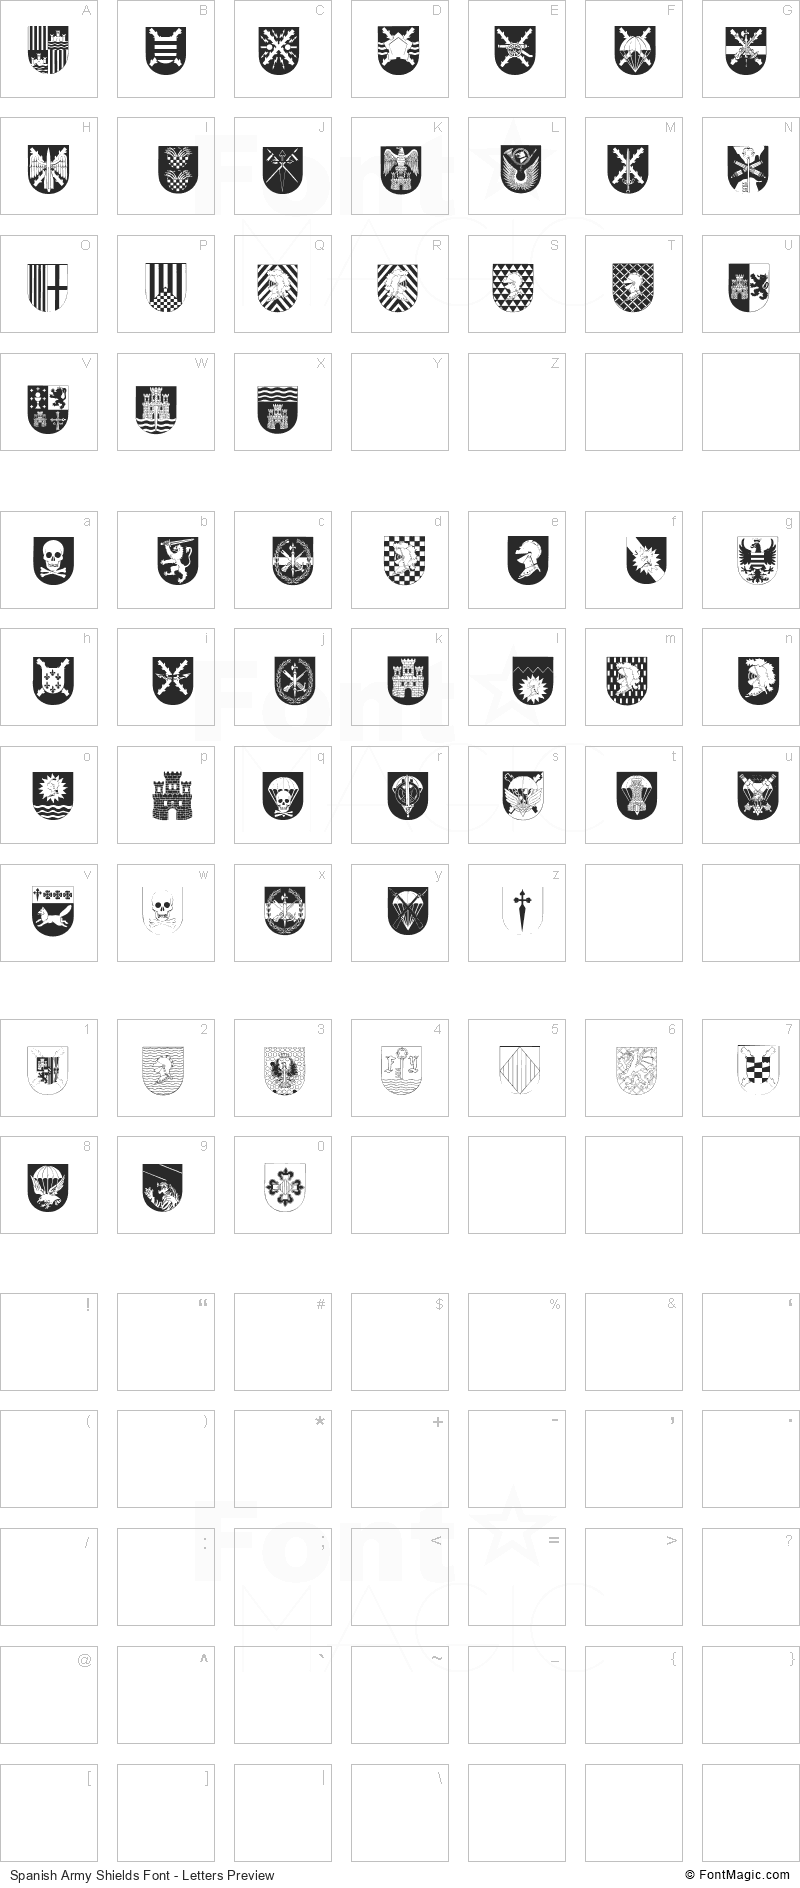 Spanish Army Shields Font - All Latters Preview Chart